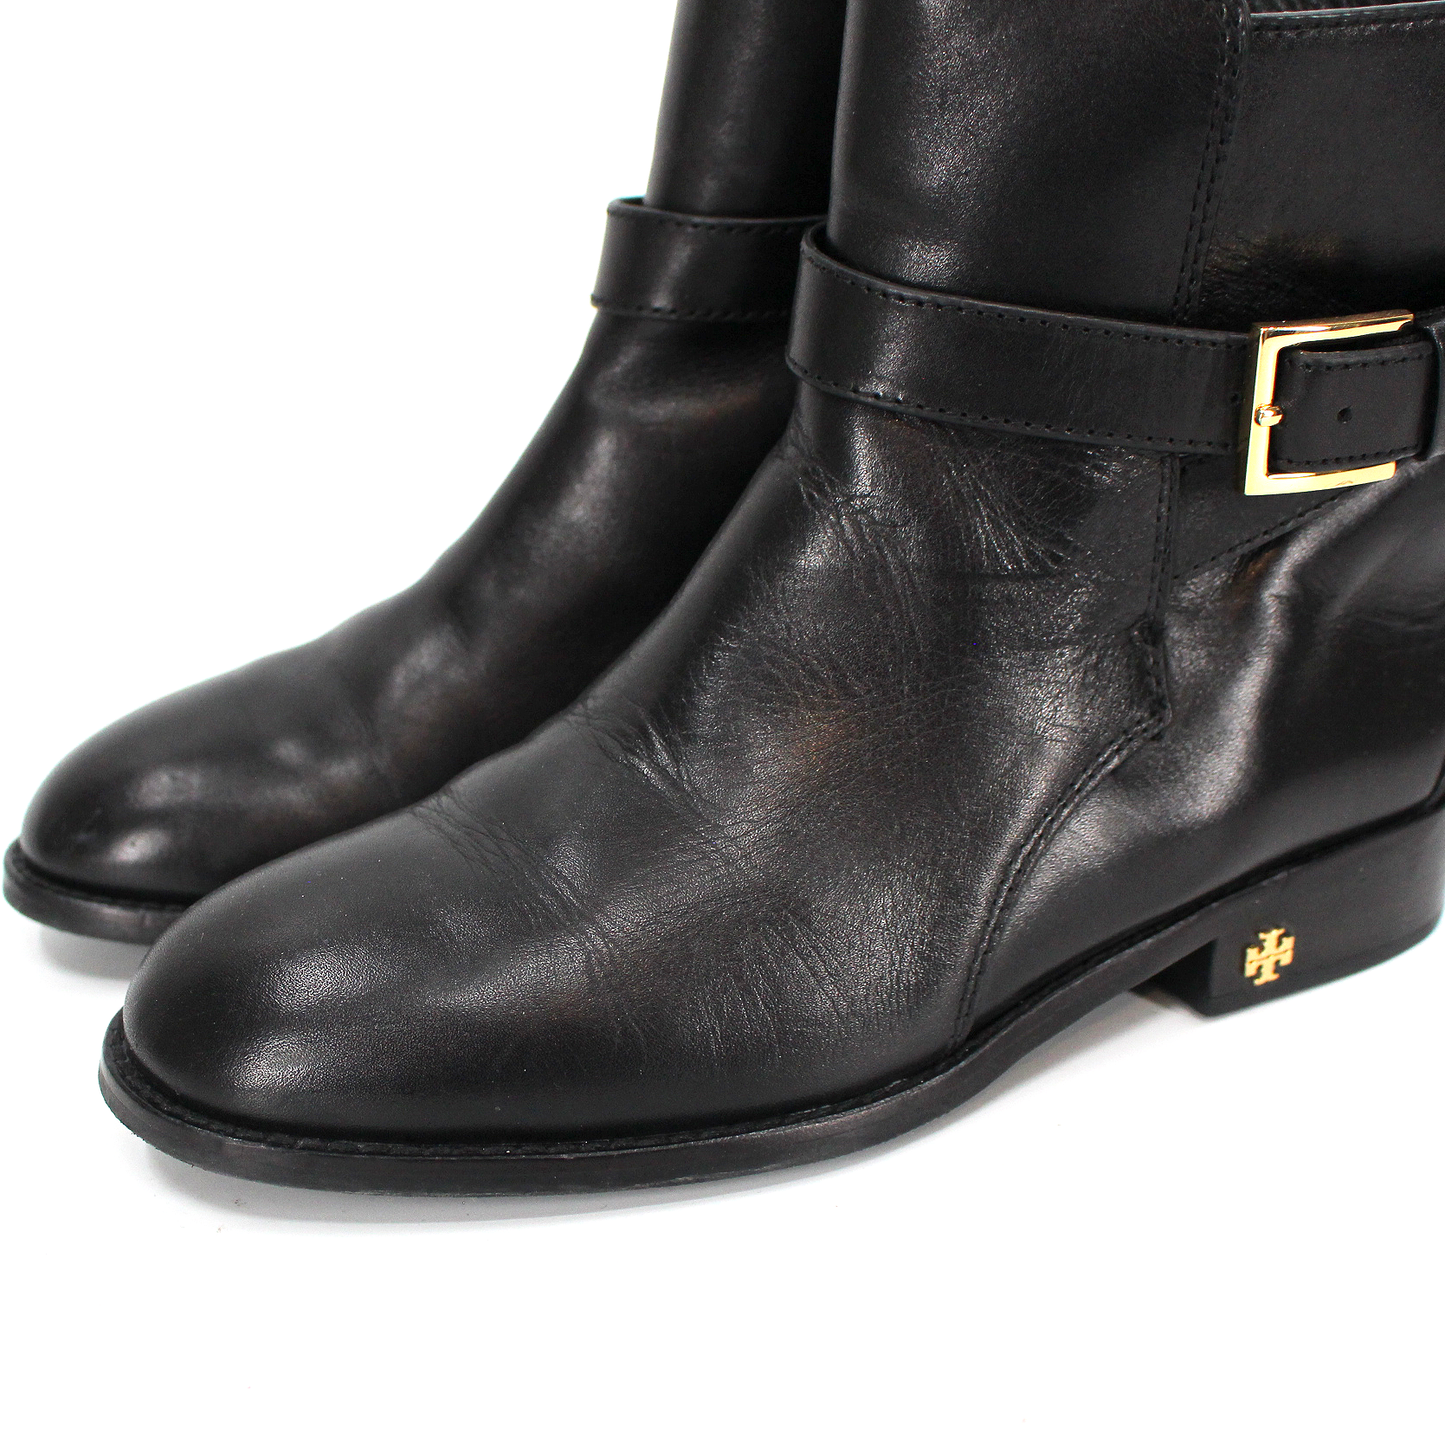 Tory Burch Brooke Leather Booties